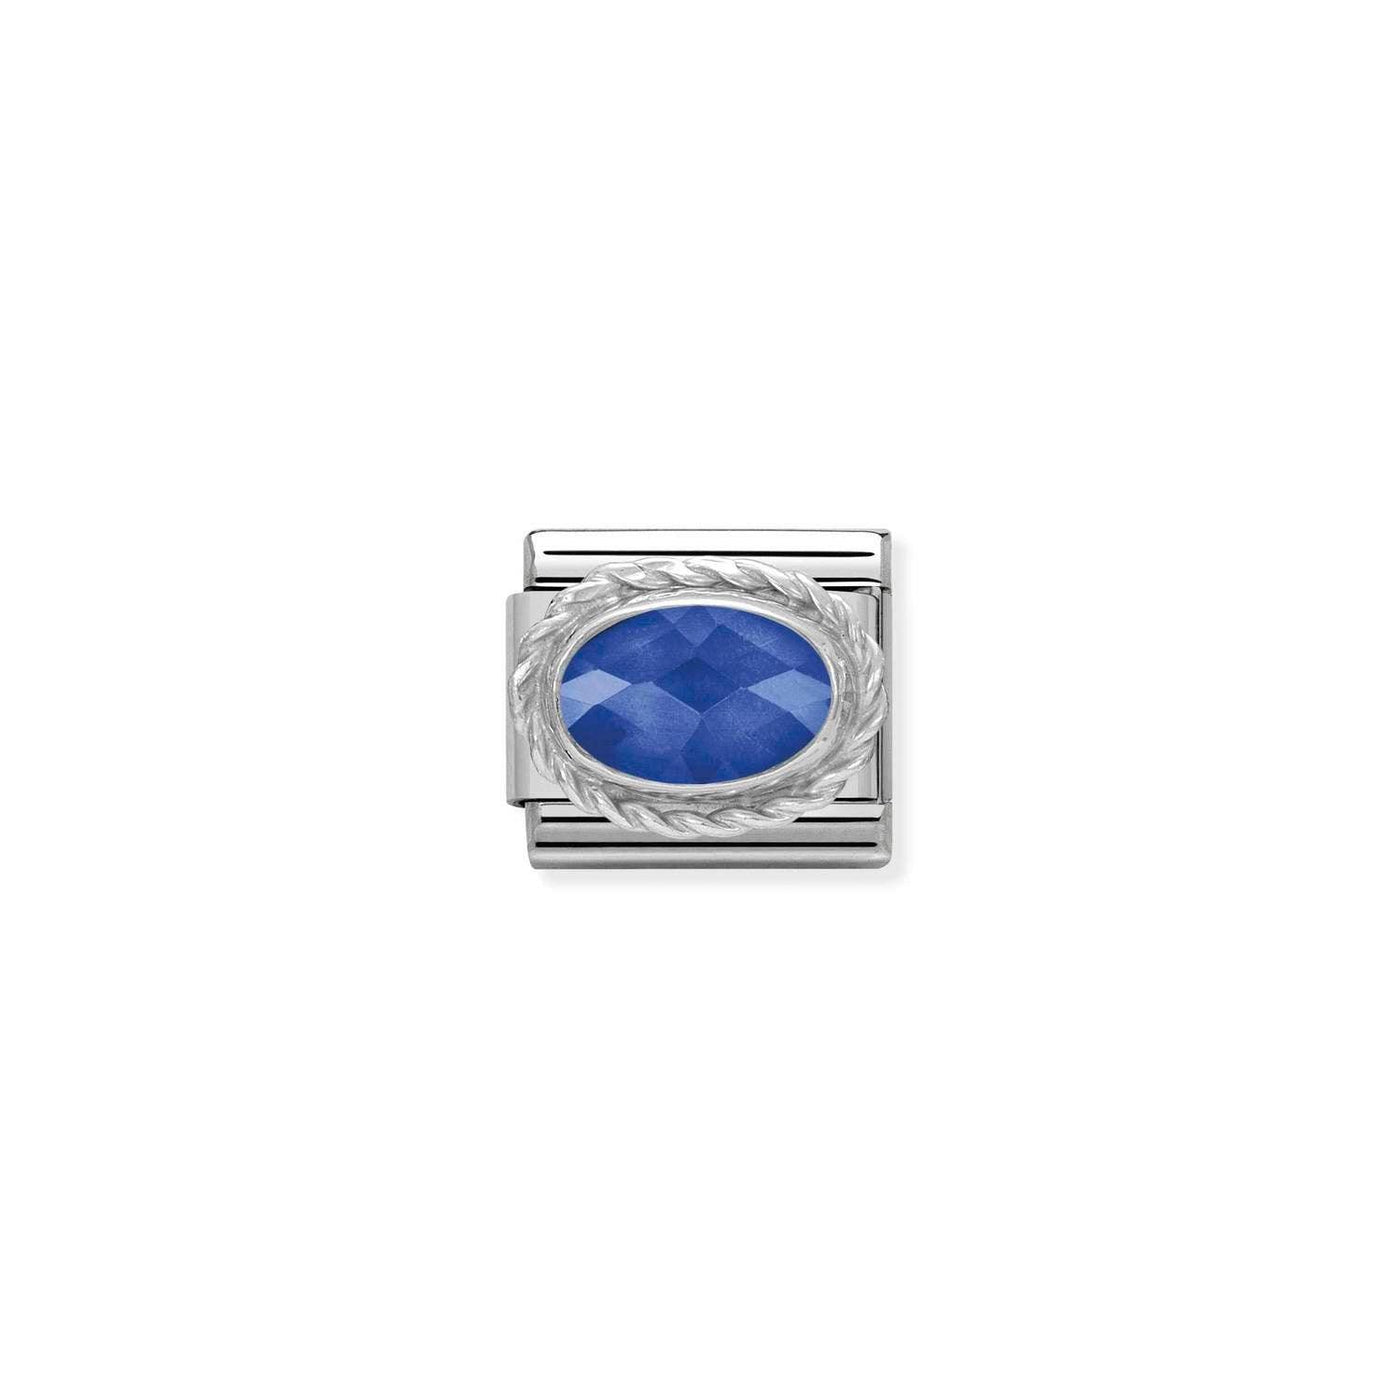 Nomination Classic Silver Faceted Blue Cubic Zirconia Charm